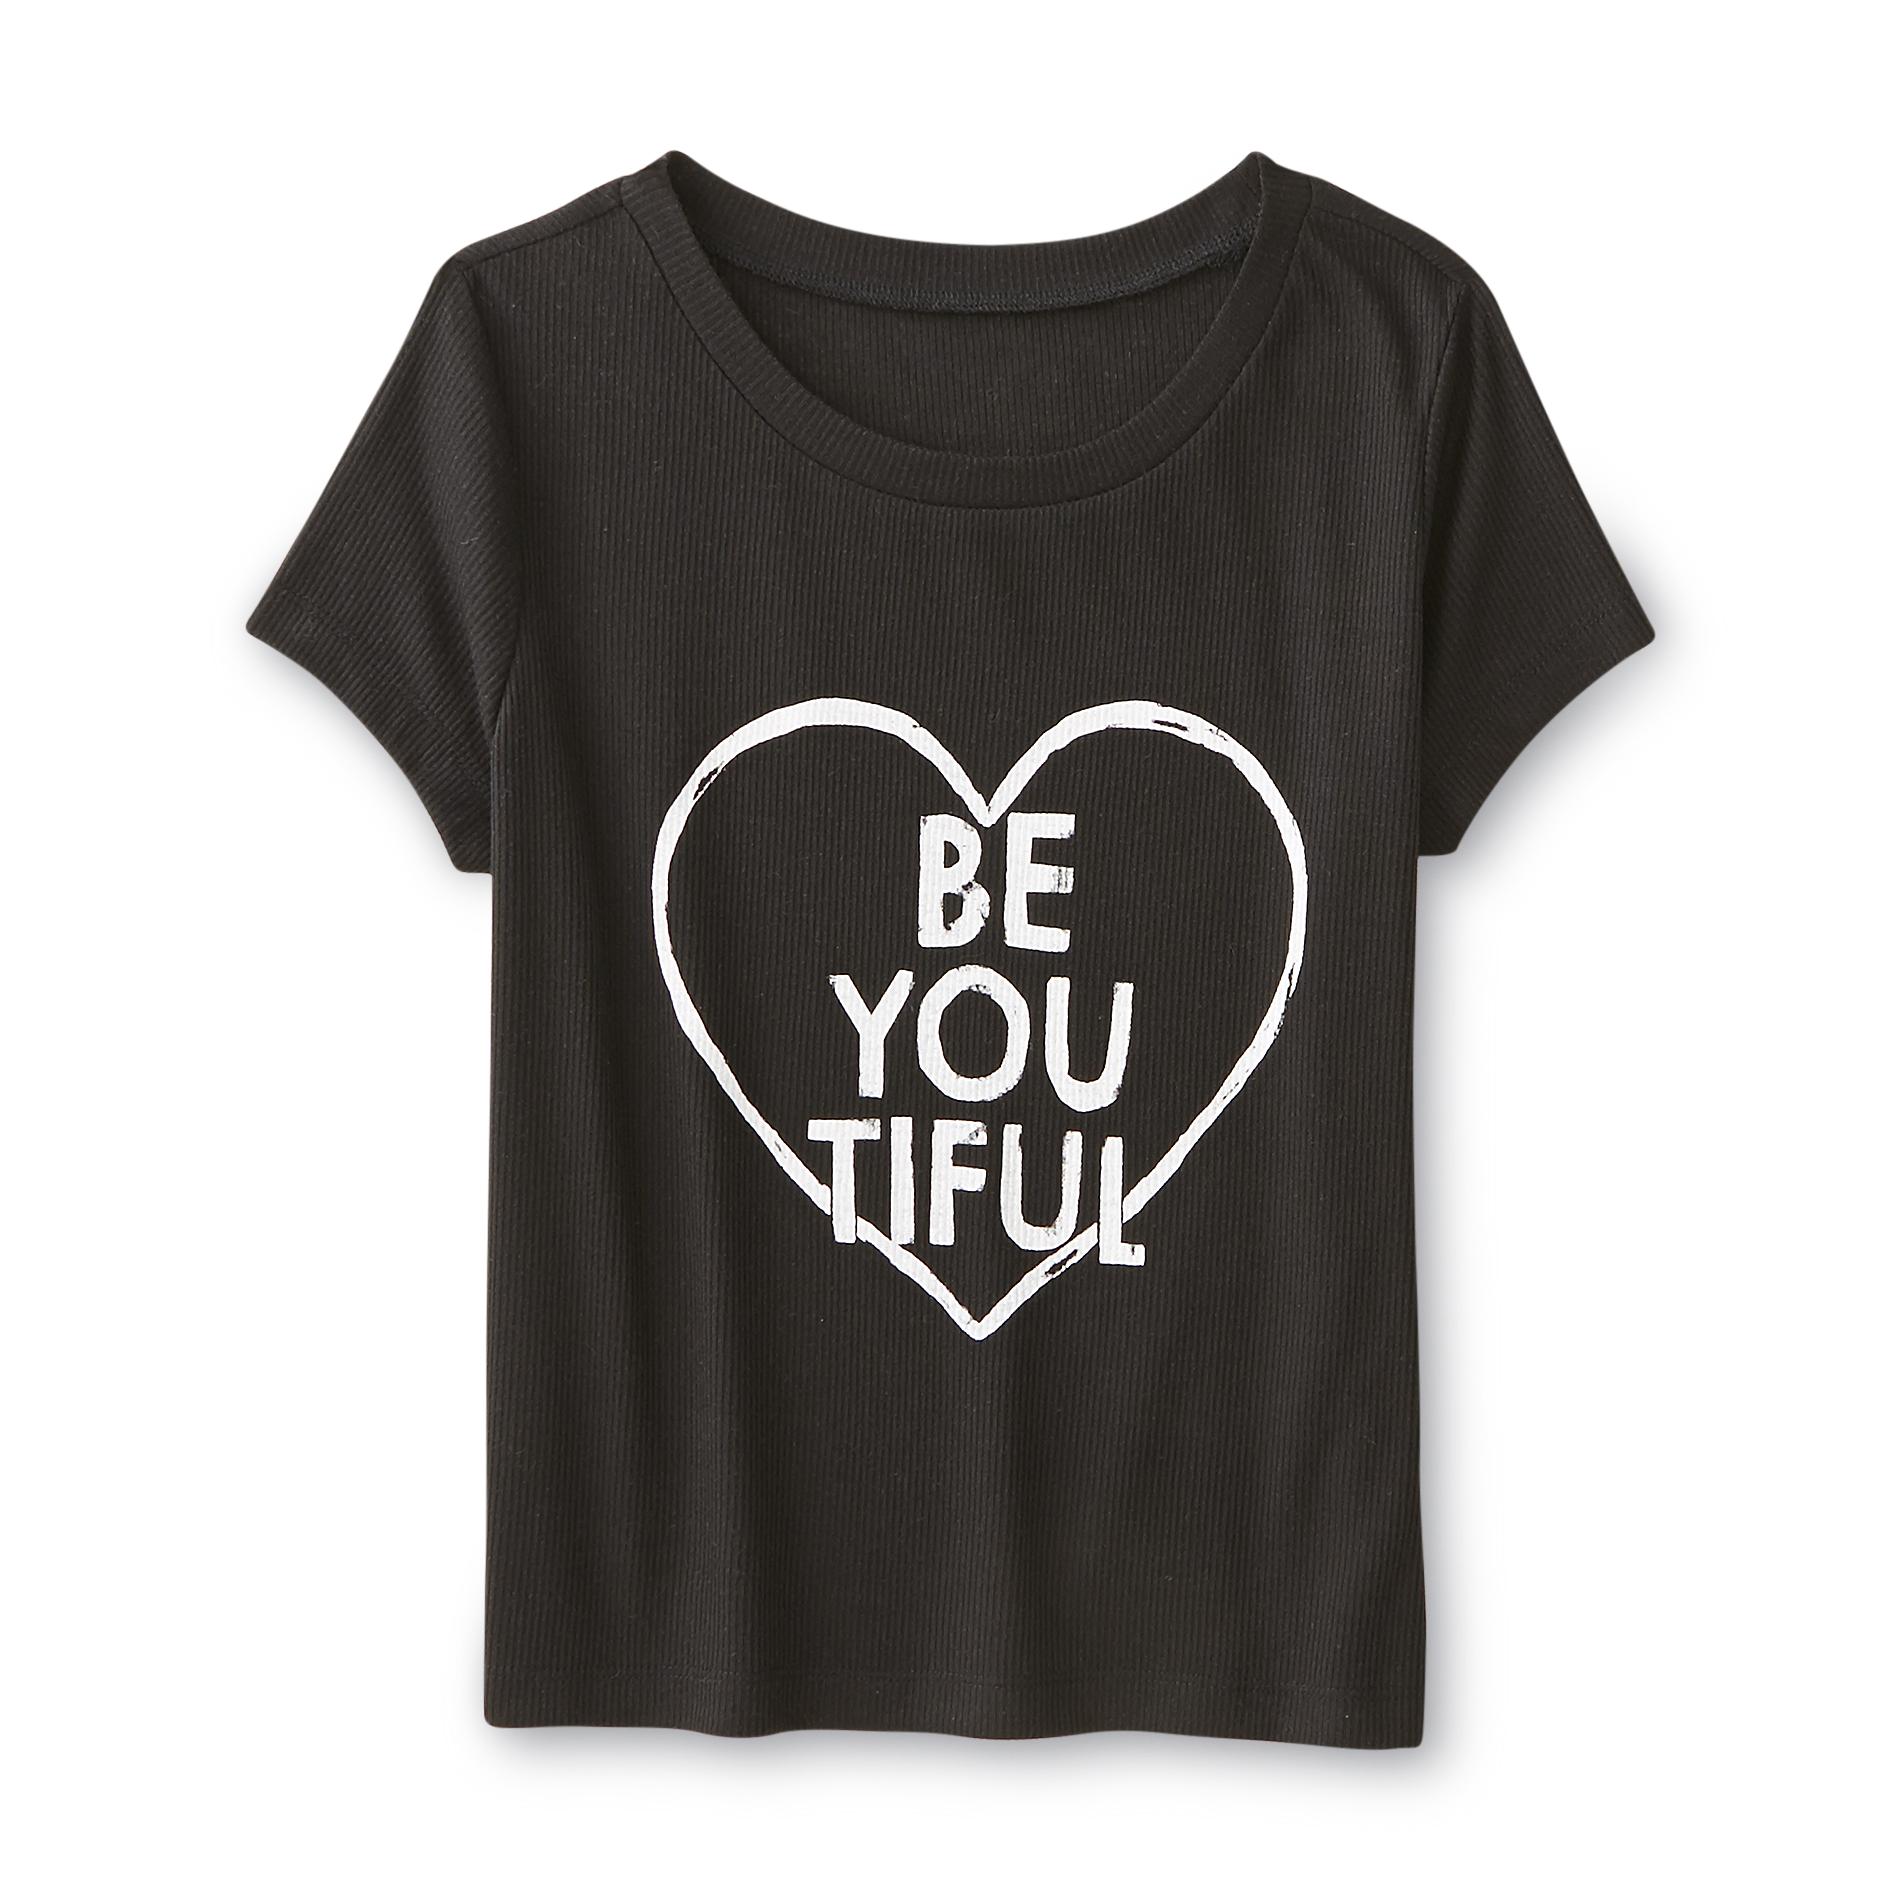 Simply Styled Girl's Rib Knit Graphic T-Shirt - Be You Tiful